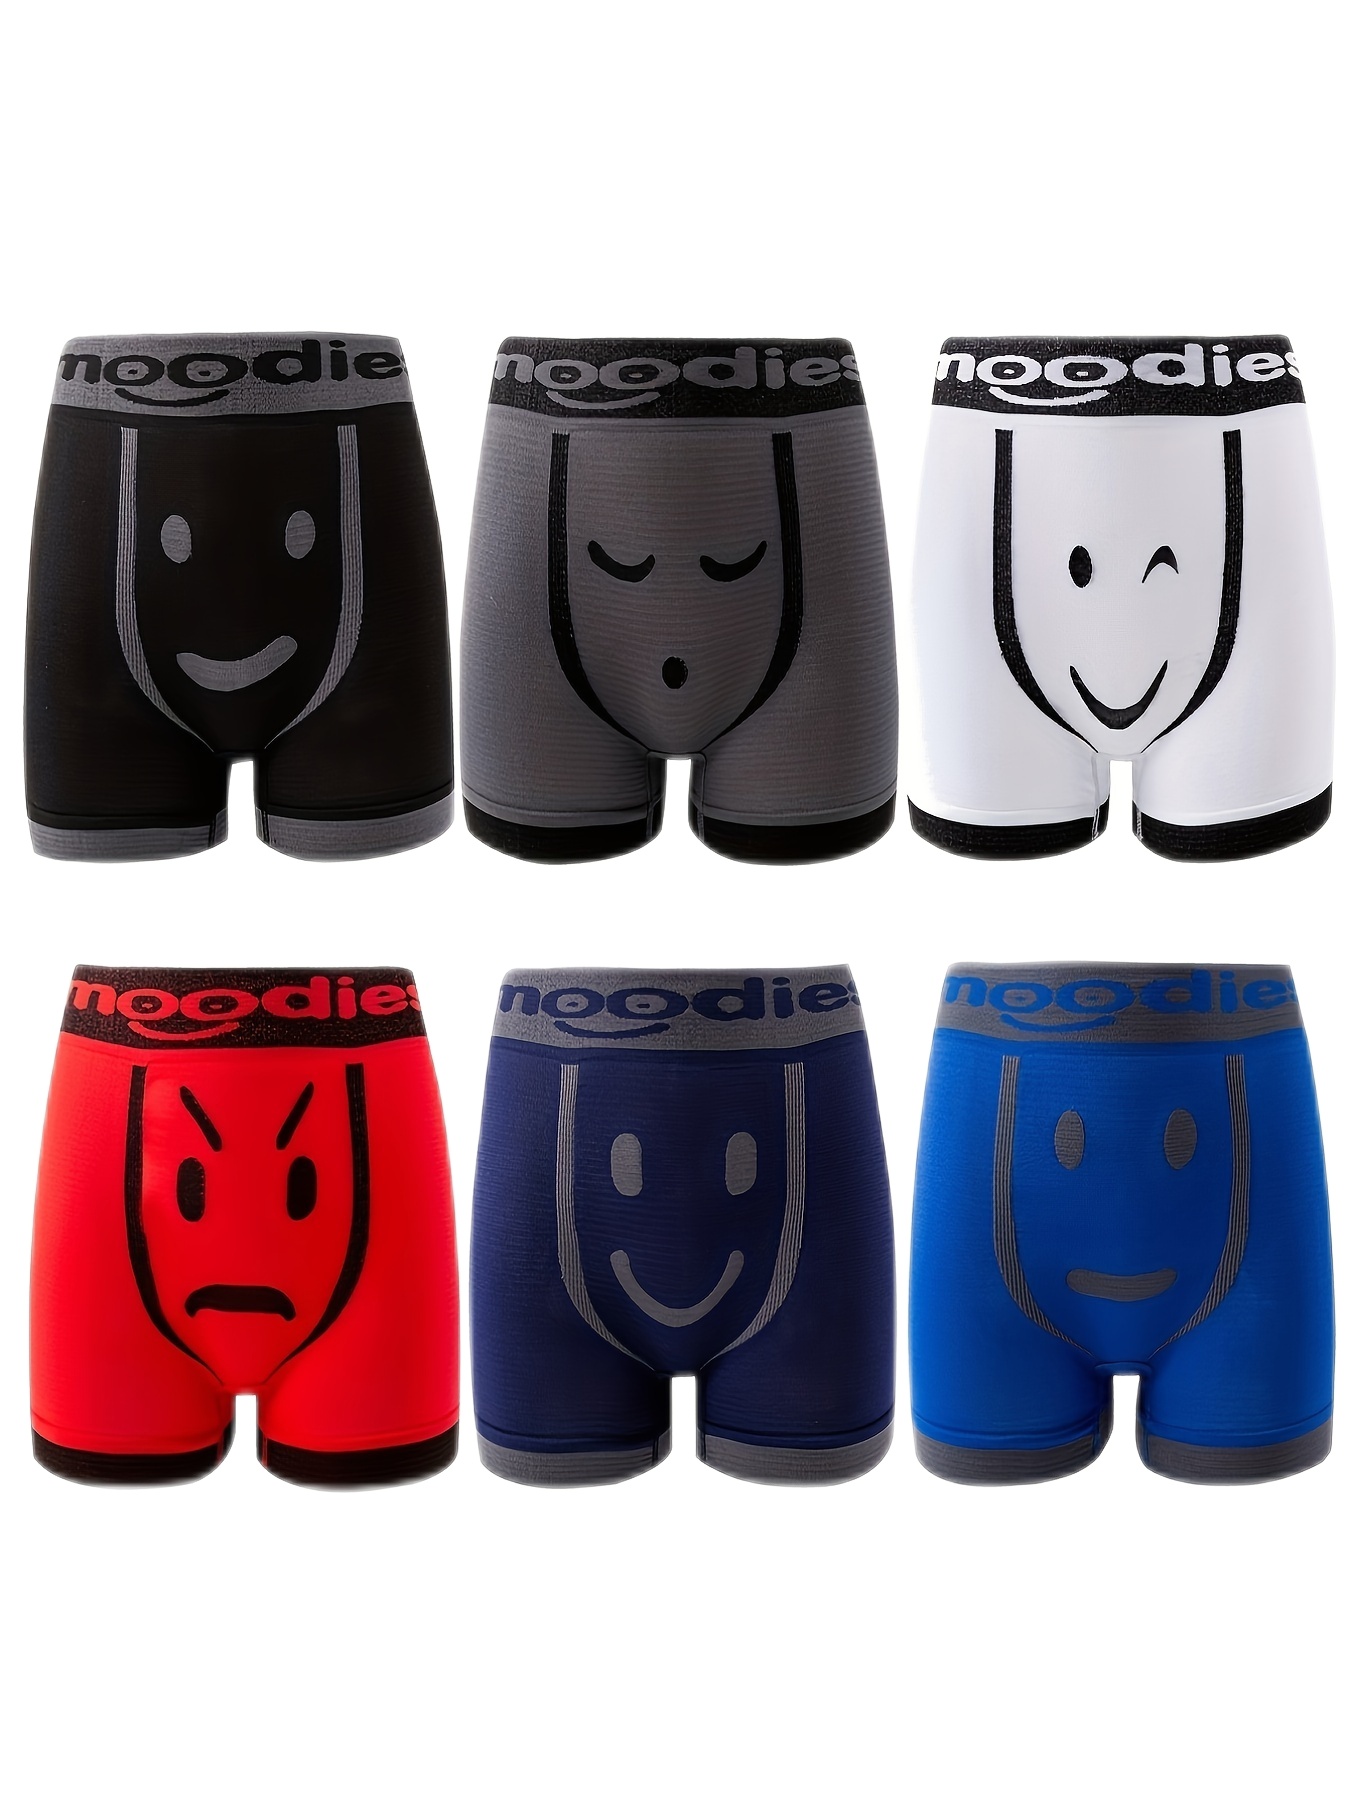  Bill Dollars Money Novelty Boxers Mens Funny Boxer Briefs  Underwear Gag Gifts for Men S : Clothing, Shoes & Jewelry